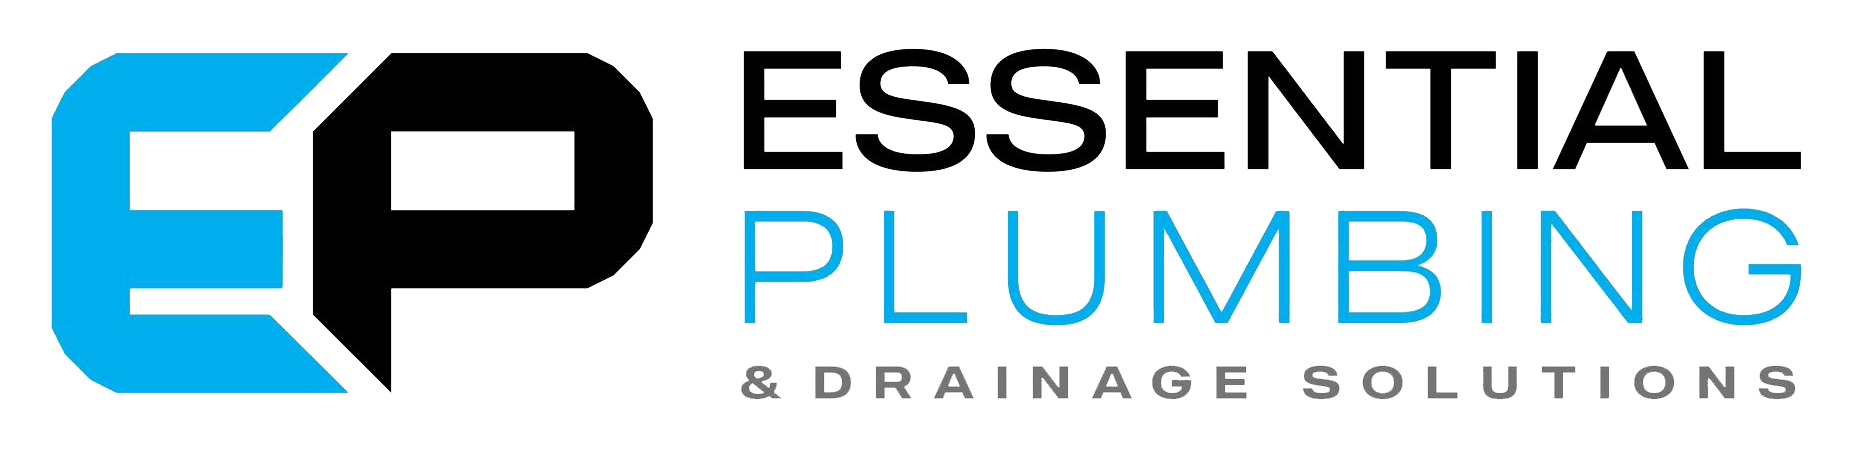 Essential Plumbing and Drainage Solutions: Your Local Plumber in Lake Macquarie